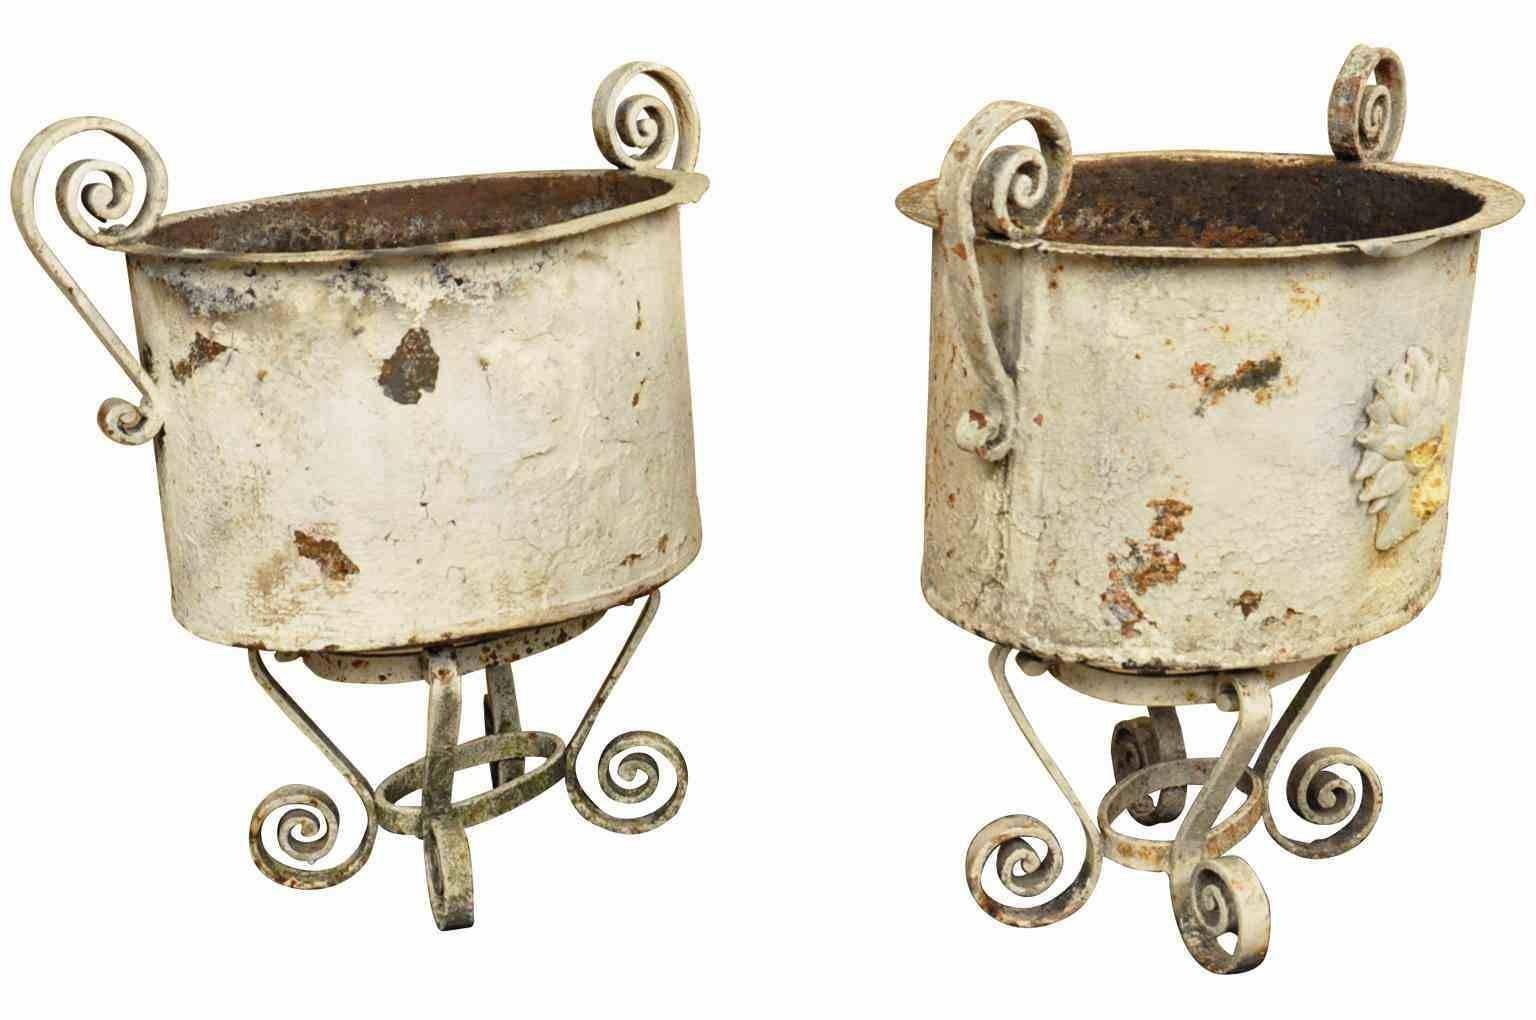 A charming pair of late 19th century French Provençal Jardinières - planters on their stands. Handsomely designed with scrolling arms and scrolling base in painted iron. One-piece is decorated with a sunflower medallion.